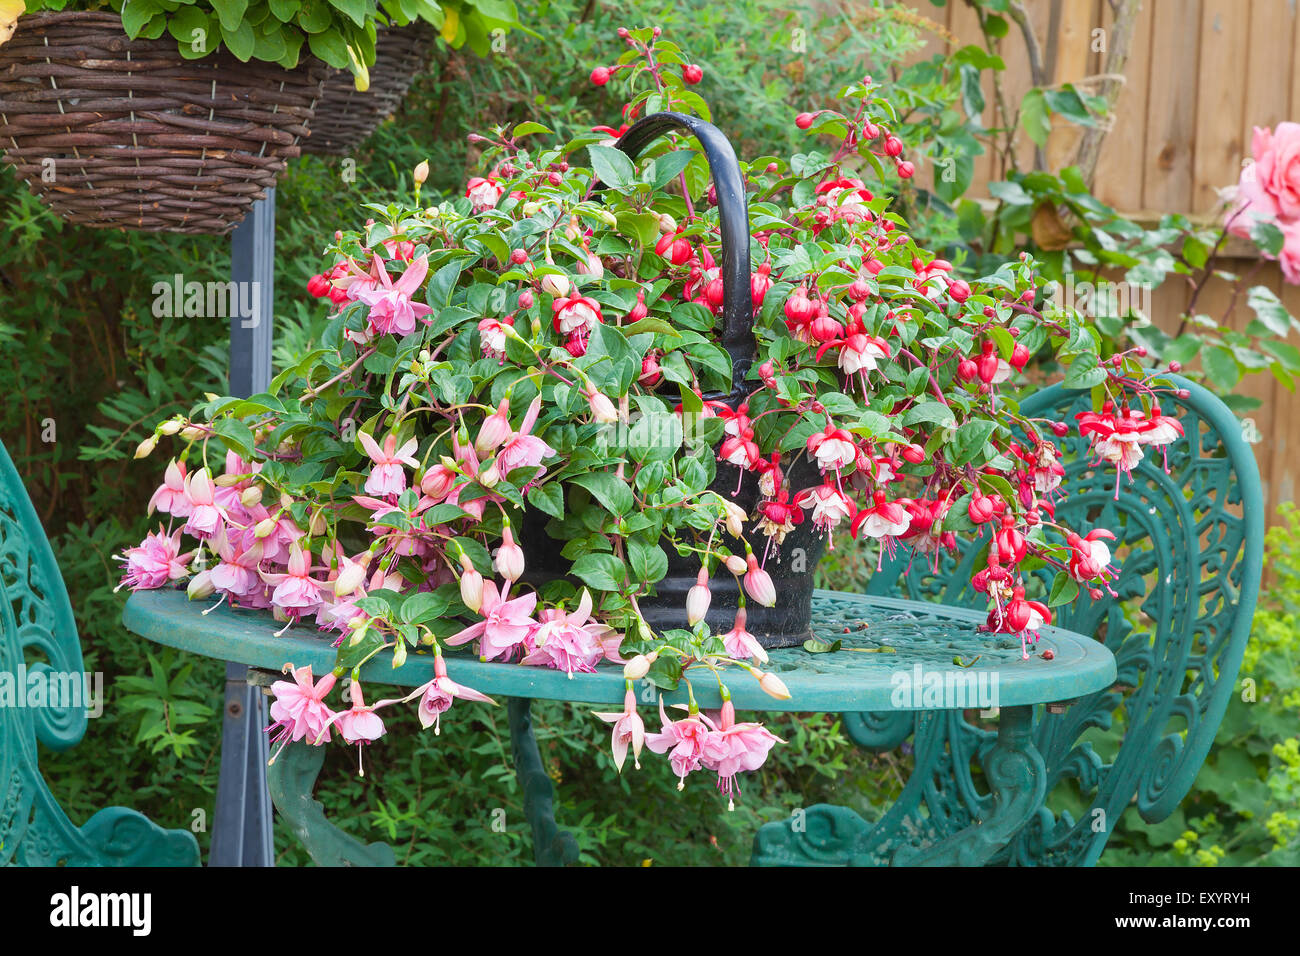 Pink fuchsia planted in a container resting on a garden table with hanging basket background Stock Photo